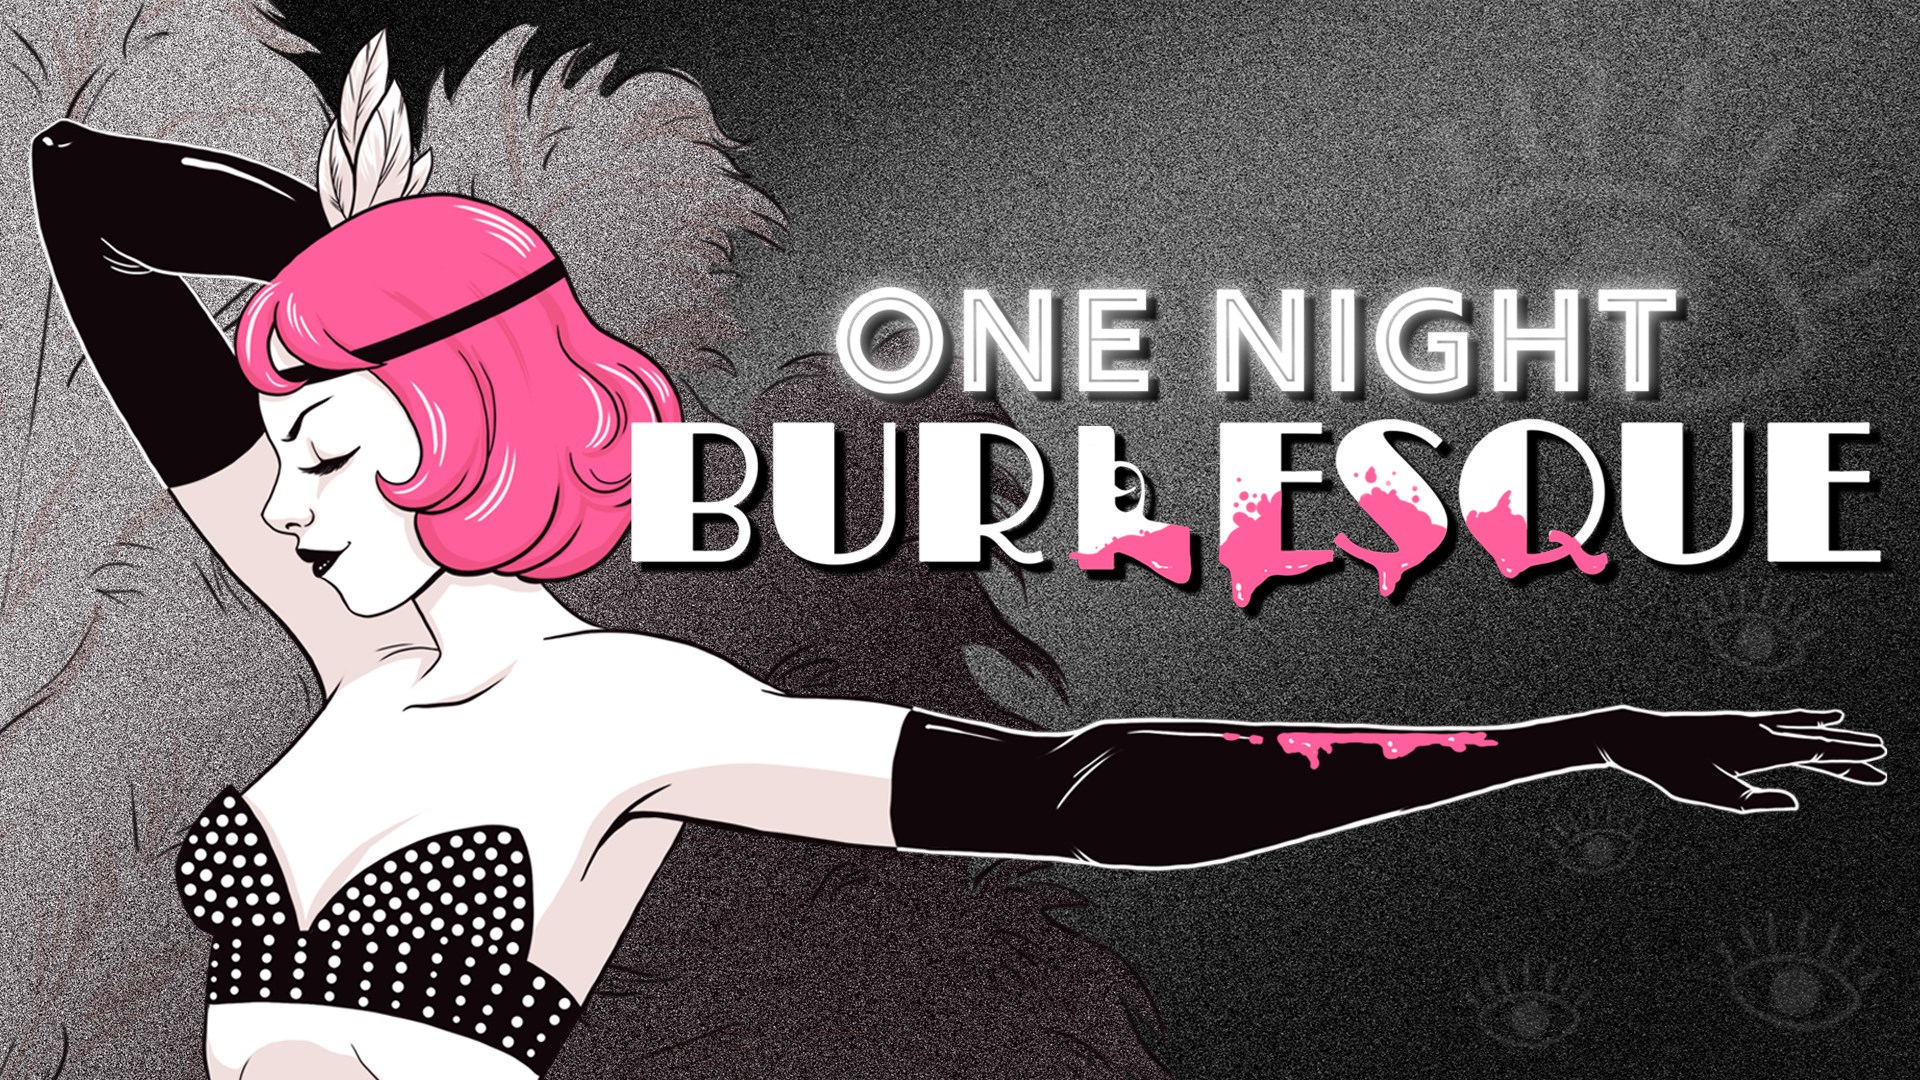 The key art for One Night: Burlesque. It features the game's logo and the top half of a pink-haired burlesque dancer.